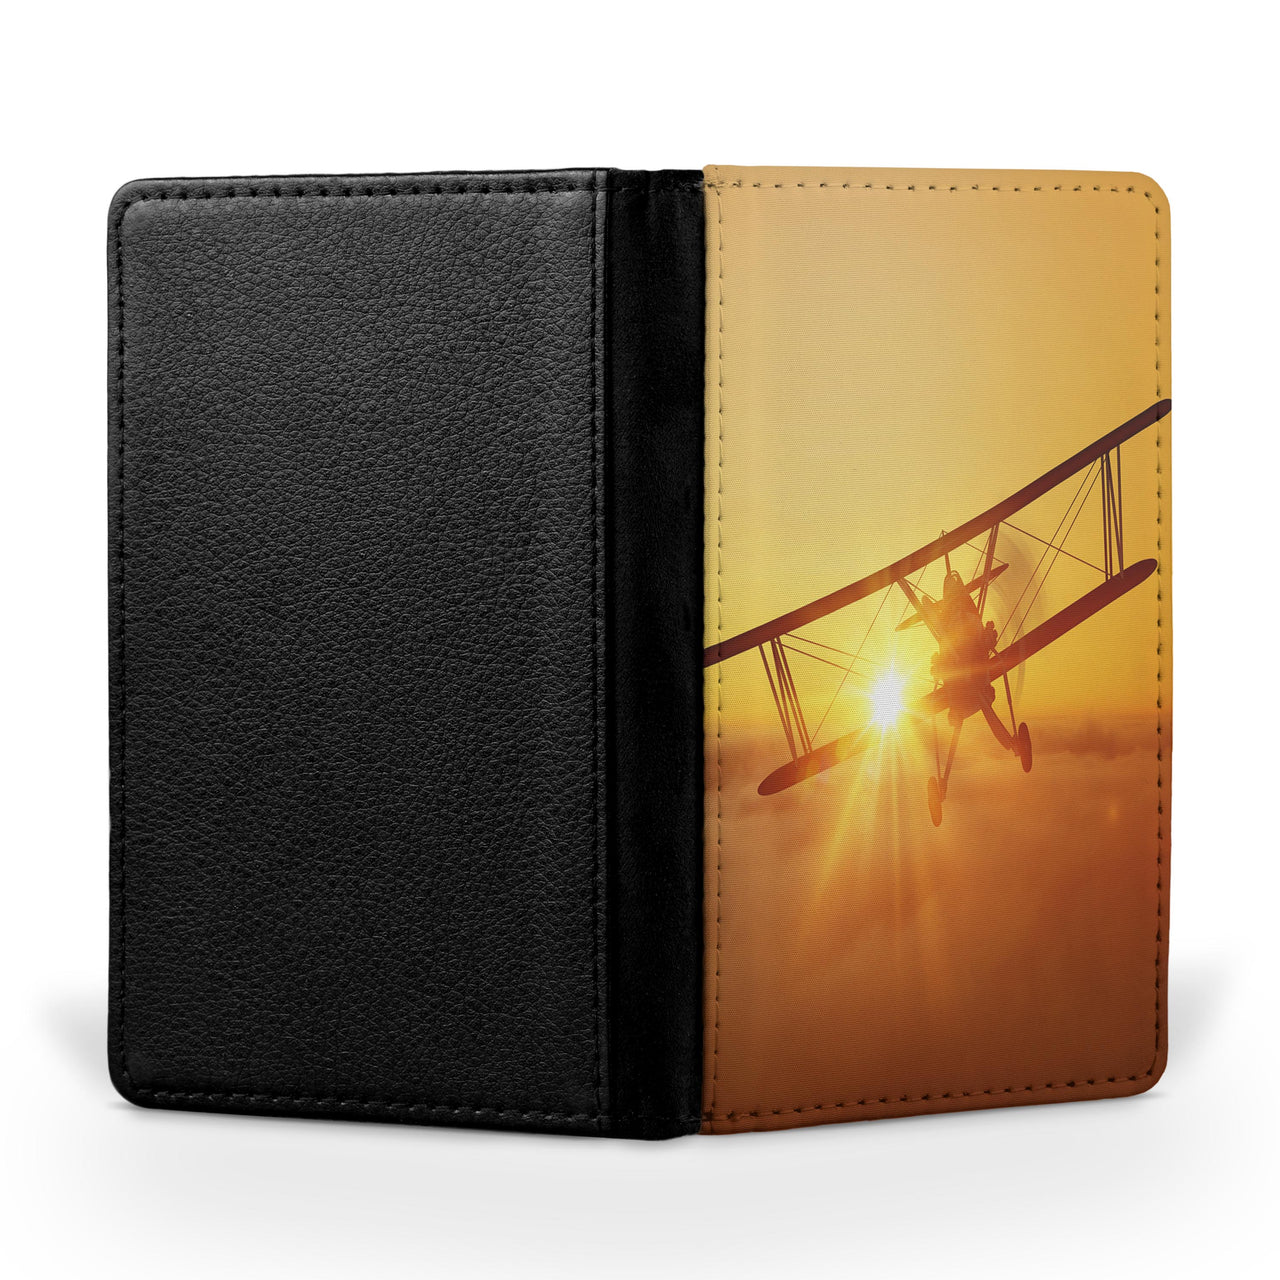 Flying is an Adventure Printed Passport & Travel Cases